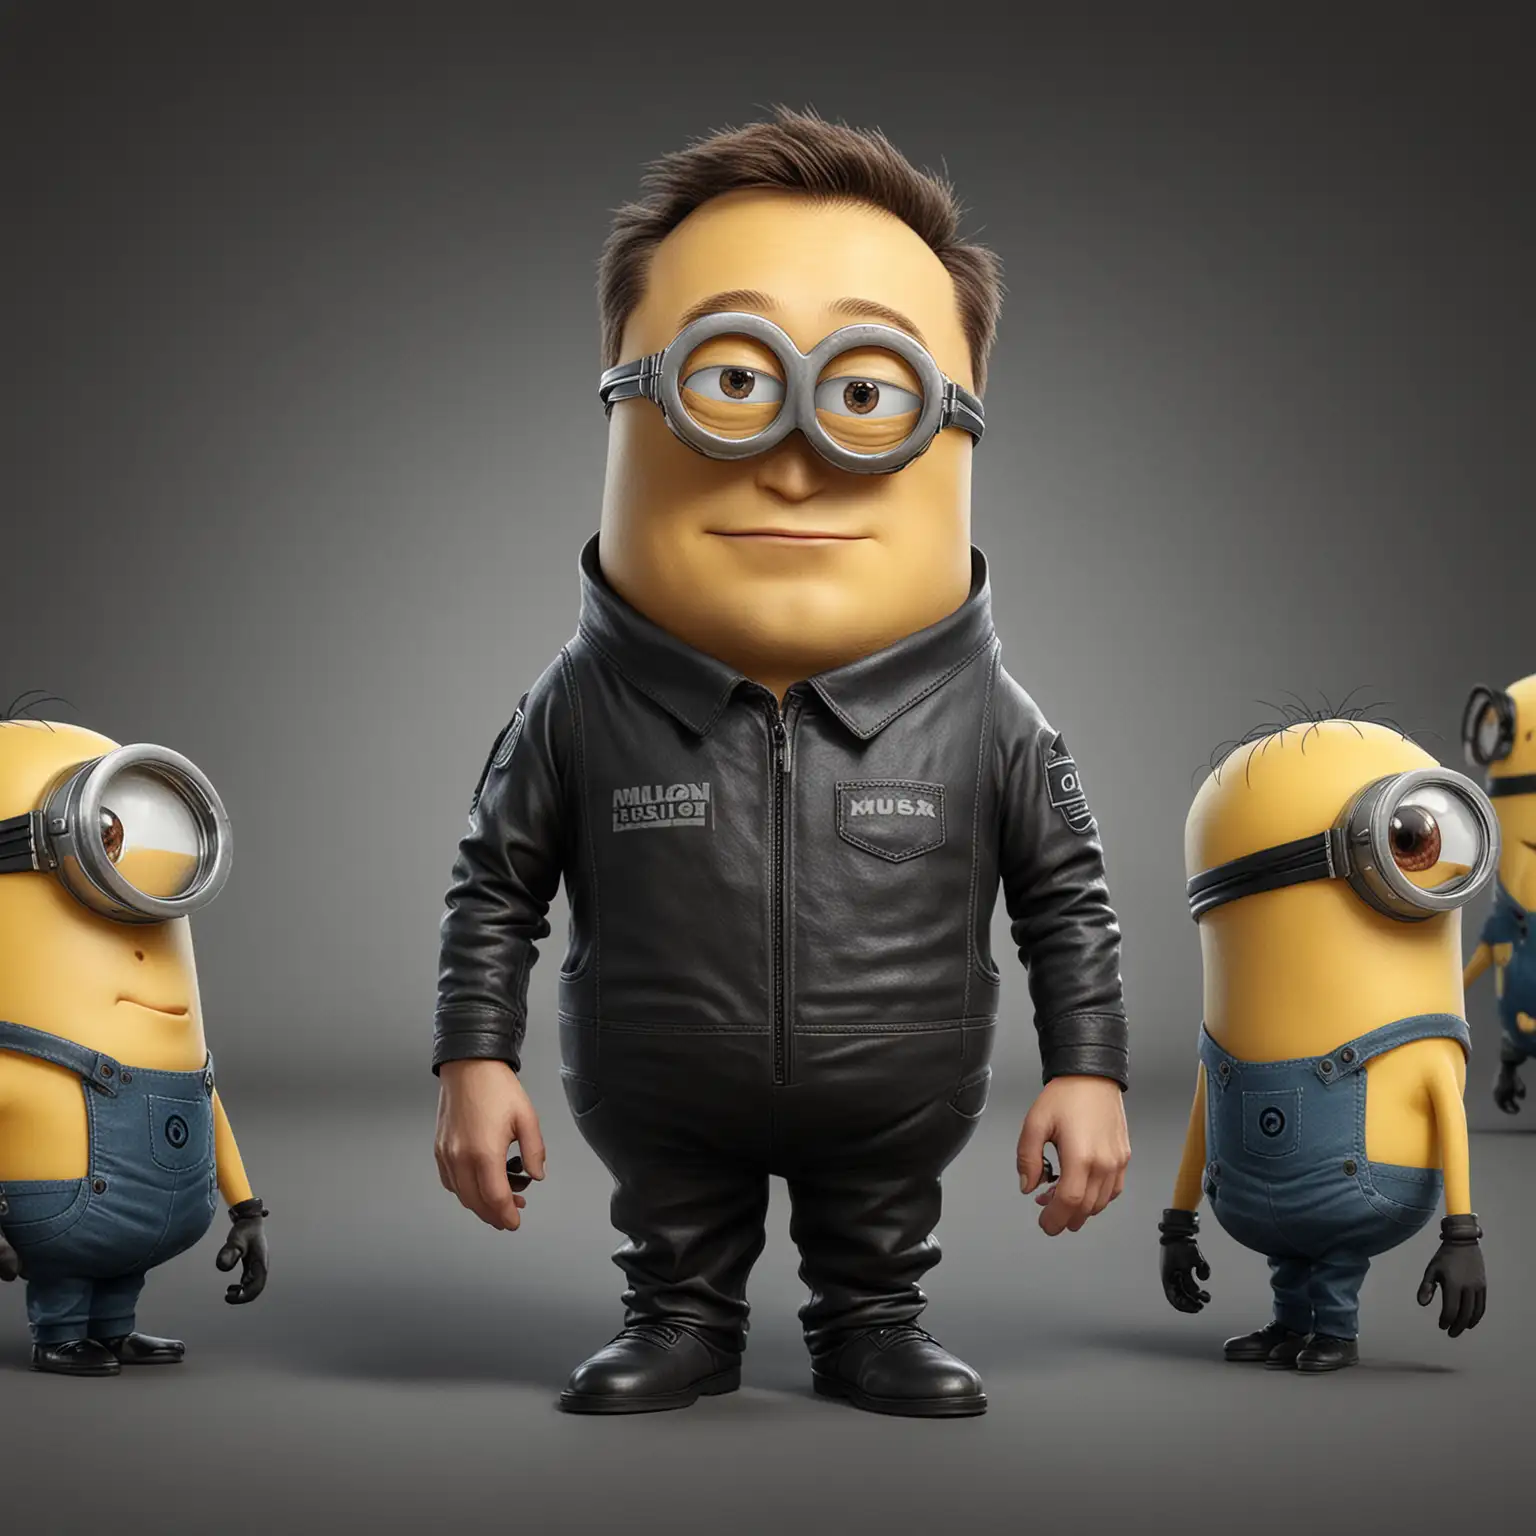 Elon Musk Dressed as a Minion for Playful Entertainment